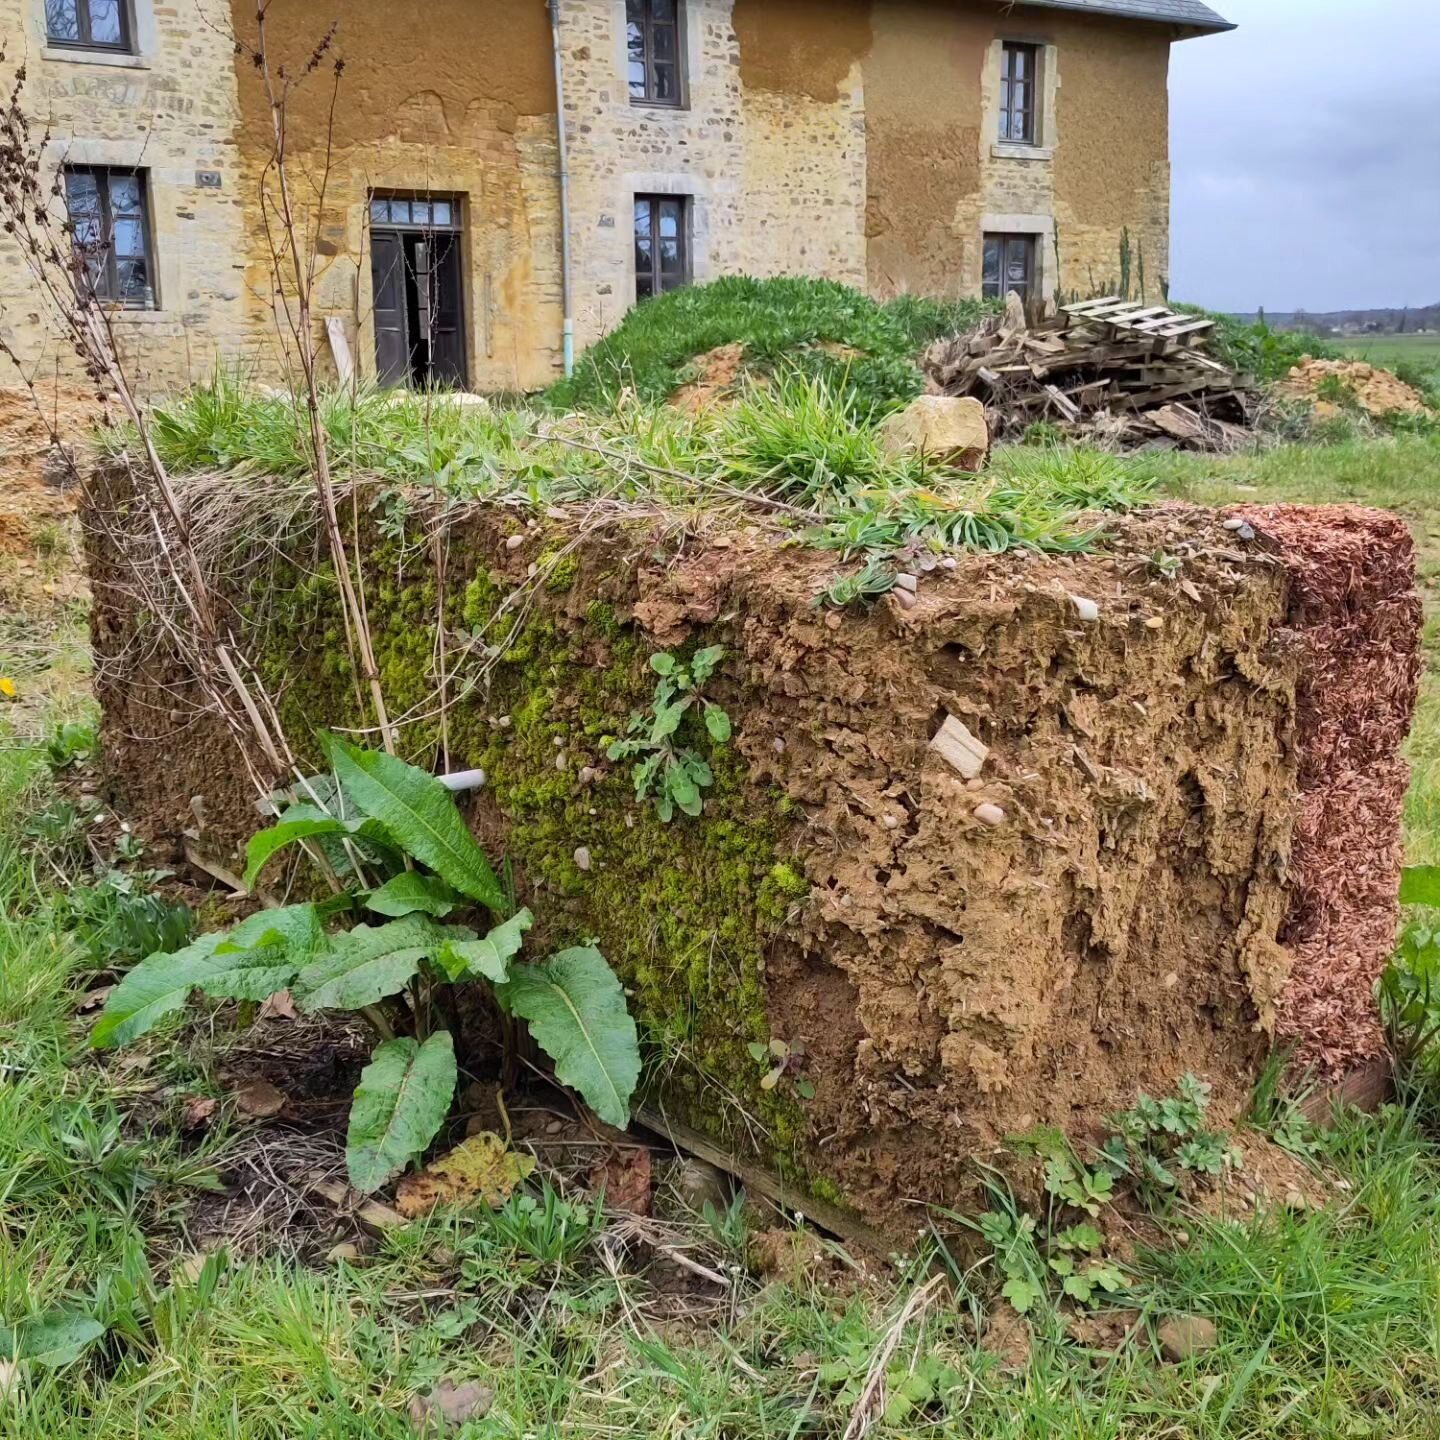 Mass earth (cob) and light earth have different biodiversity potential, two sides of the same wall left out in a French marsh for 4 years, a roof would certainly make a difference 
#cobbauge #lightearth #biodiversity